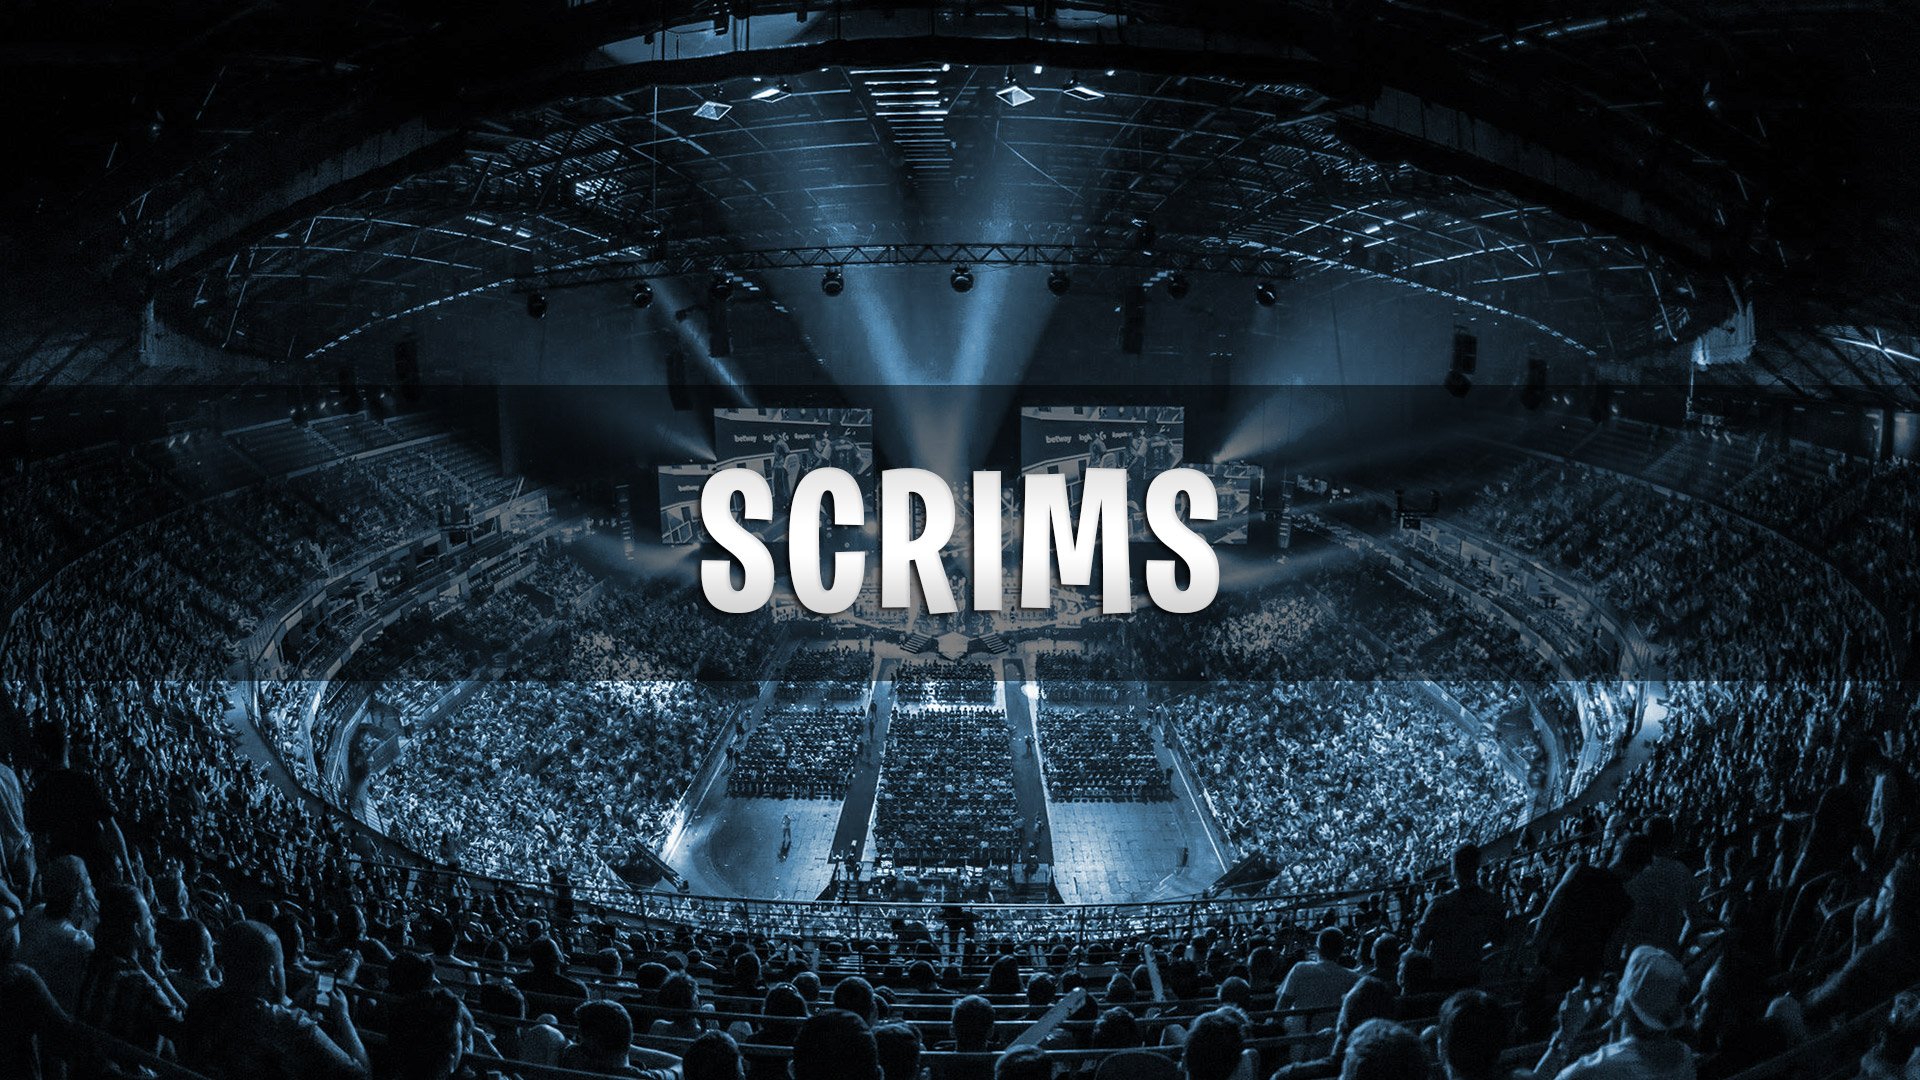 Scrims Pro Scrims What Is It And How To Join Scrims Yogaming Com - in this article we will explain what a scrim and pro scrim is and how you can do scrims yourself